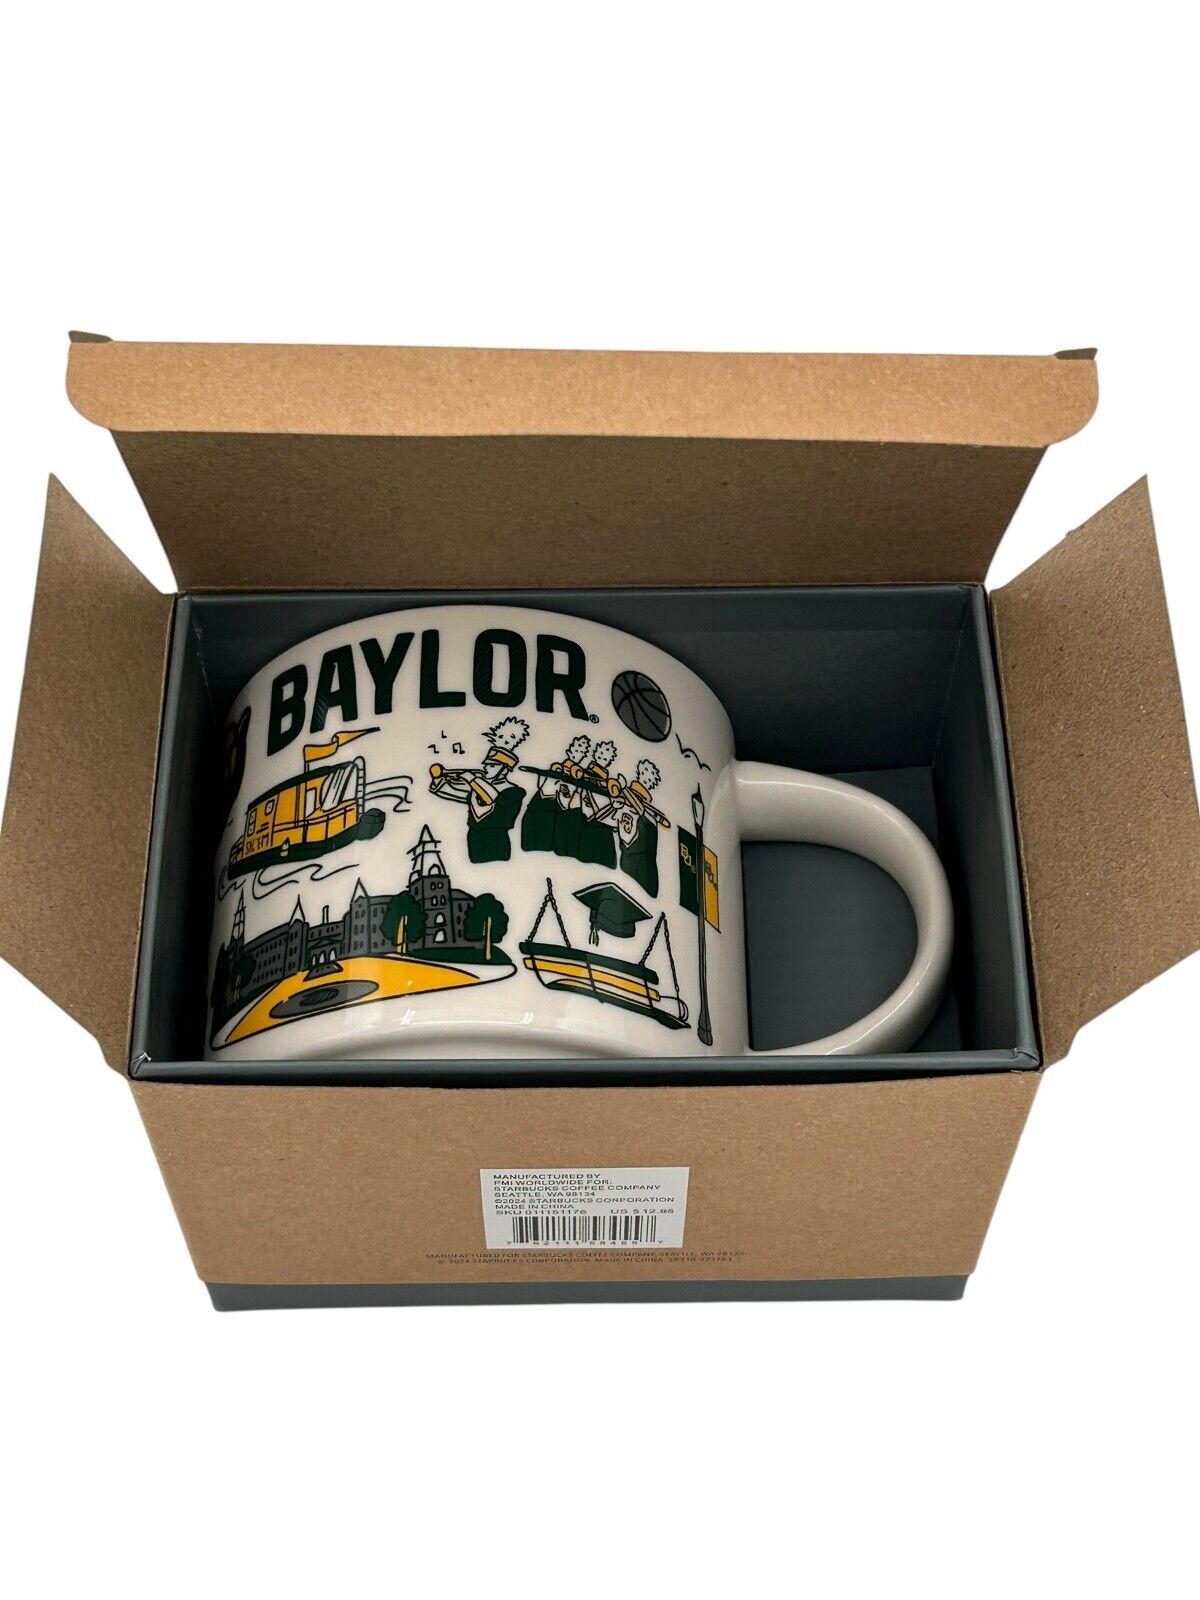 Starbucks BAYLOR University Been There Series Campus Collection 14 oz mug NEW